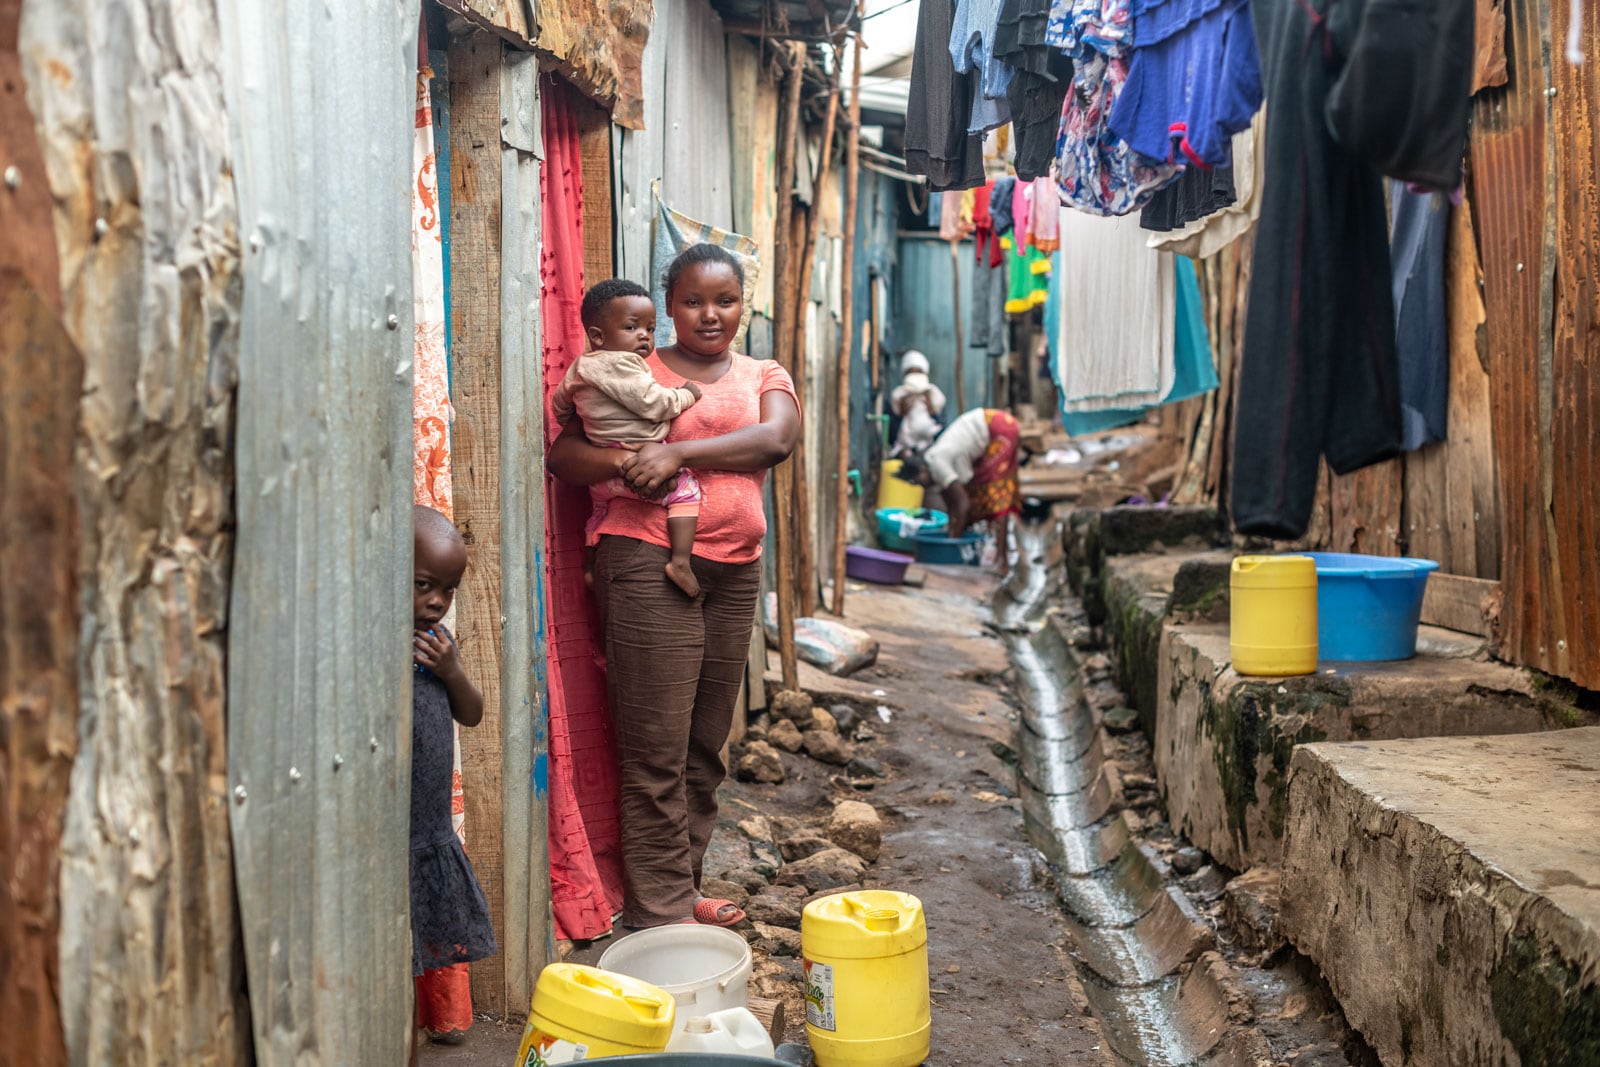 Wanja is standing outside in the alley of the slum where she lives. She is wearing a red shirt and brown pants. She is holding her youngest child. There are clothes hanging up on clotheslines behind her.